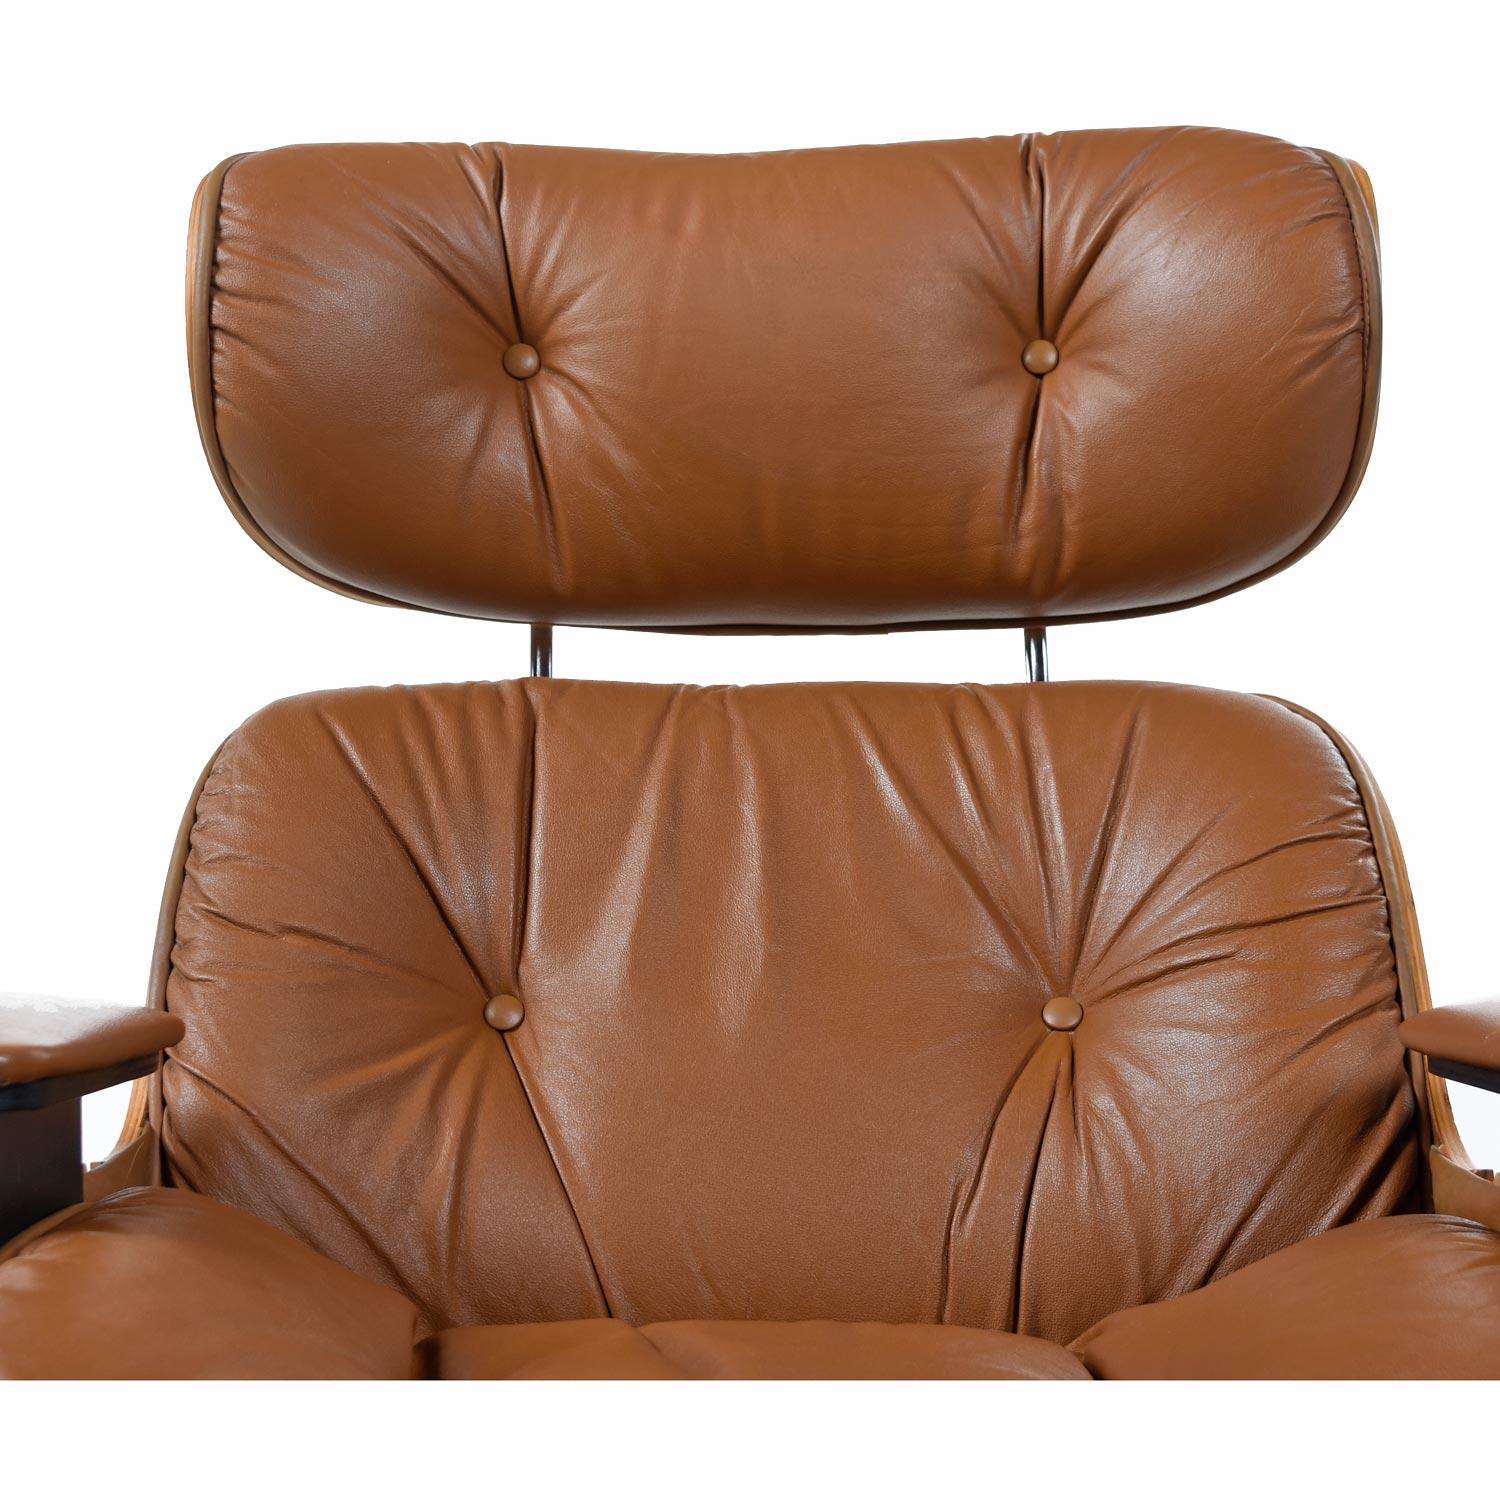 Late 20th Century Mid-Century Modern Eames Style Lounge Chair and Ottoman